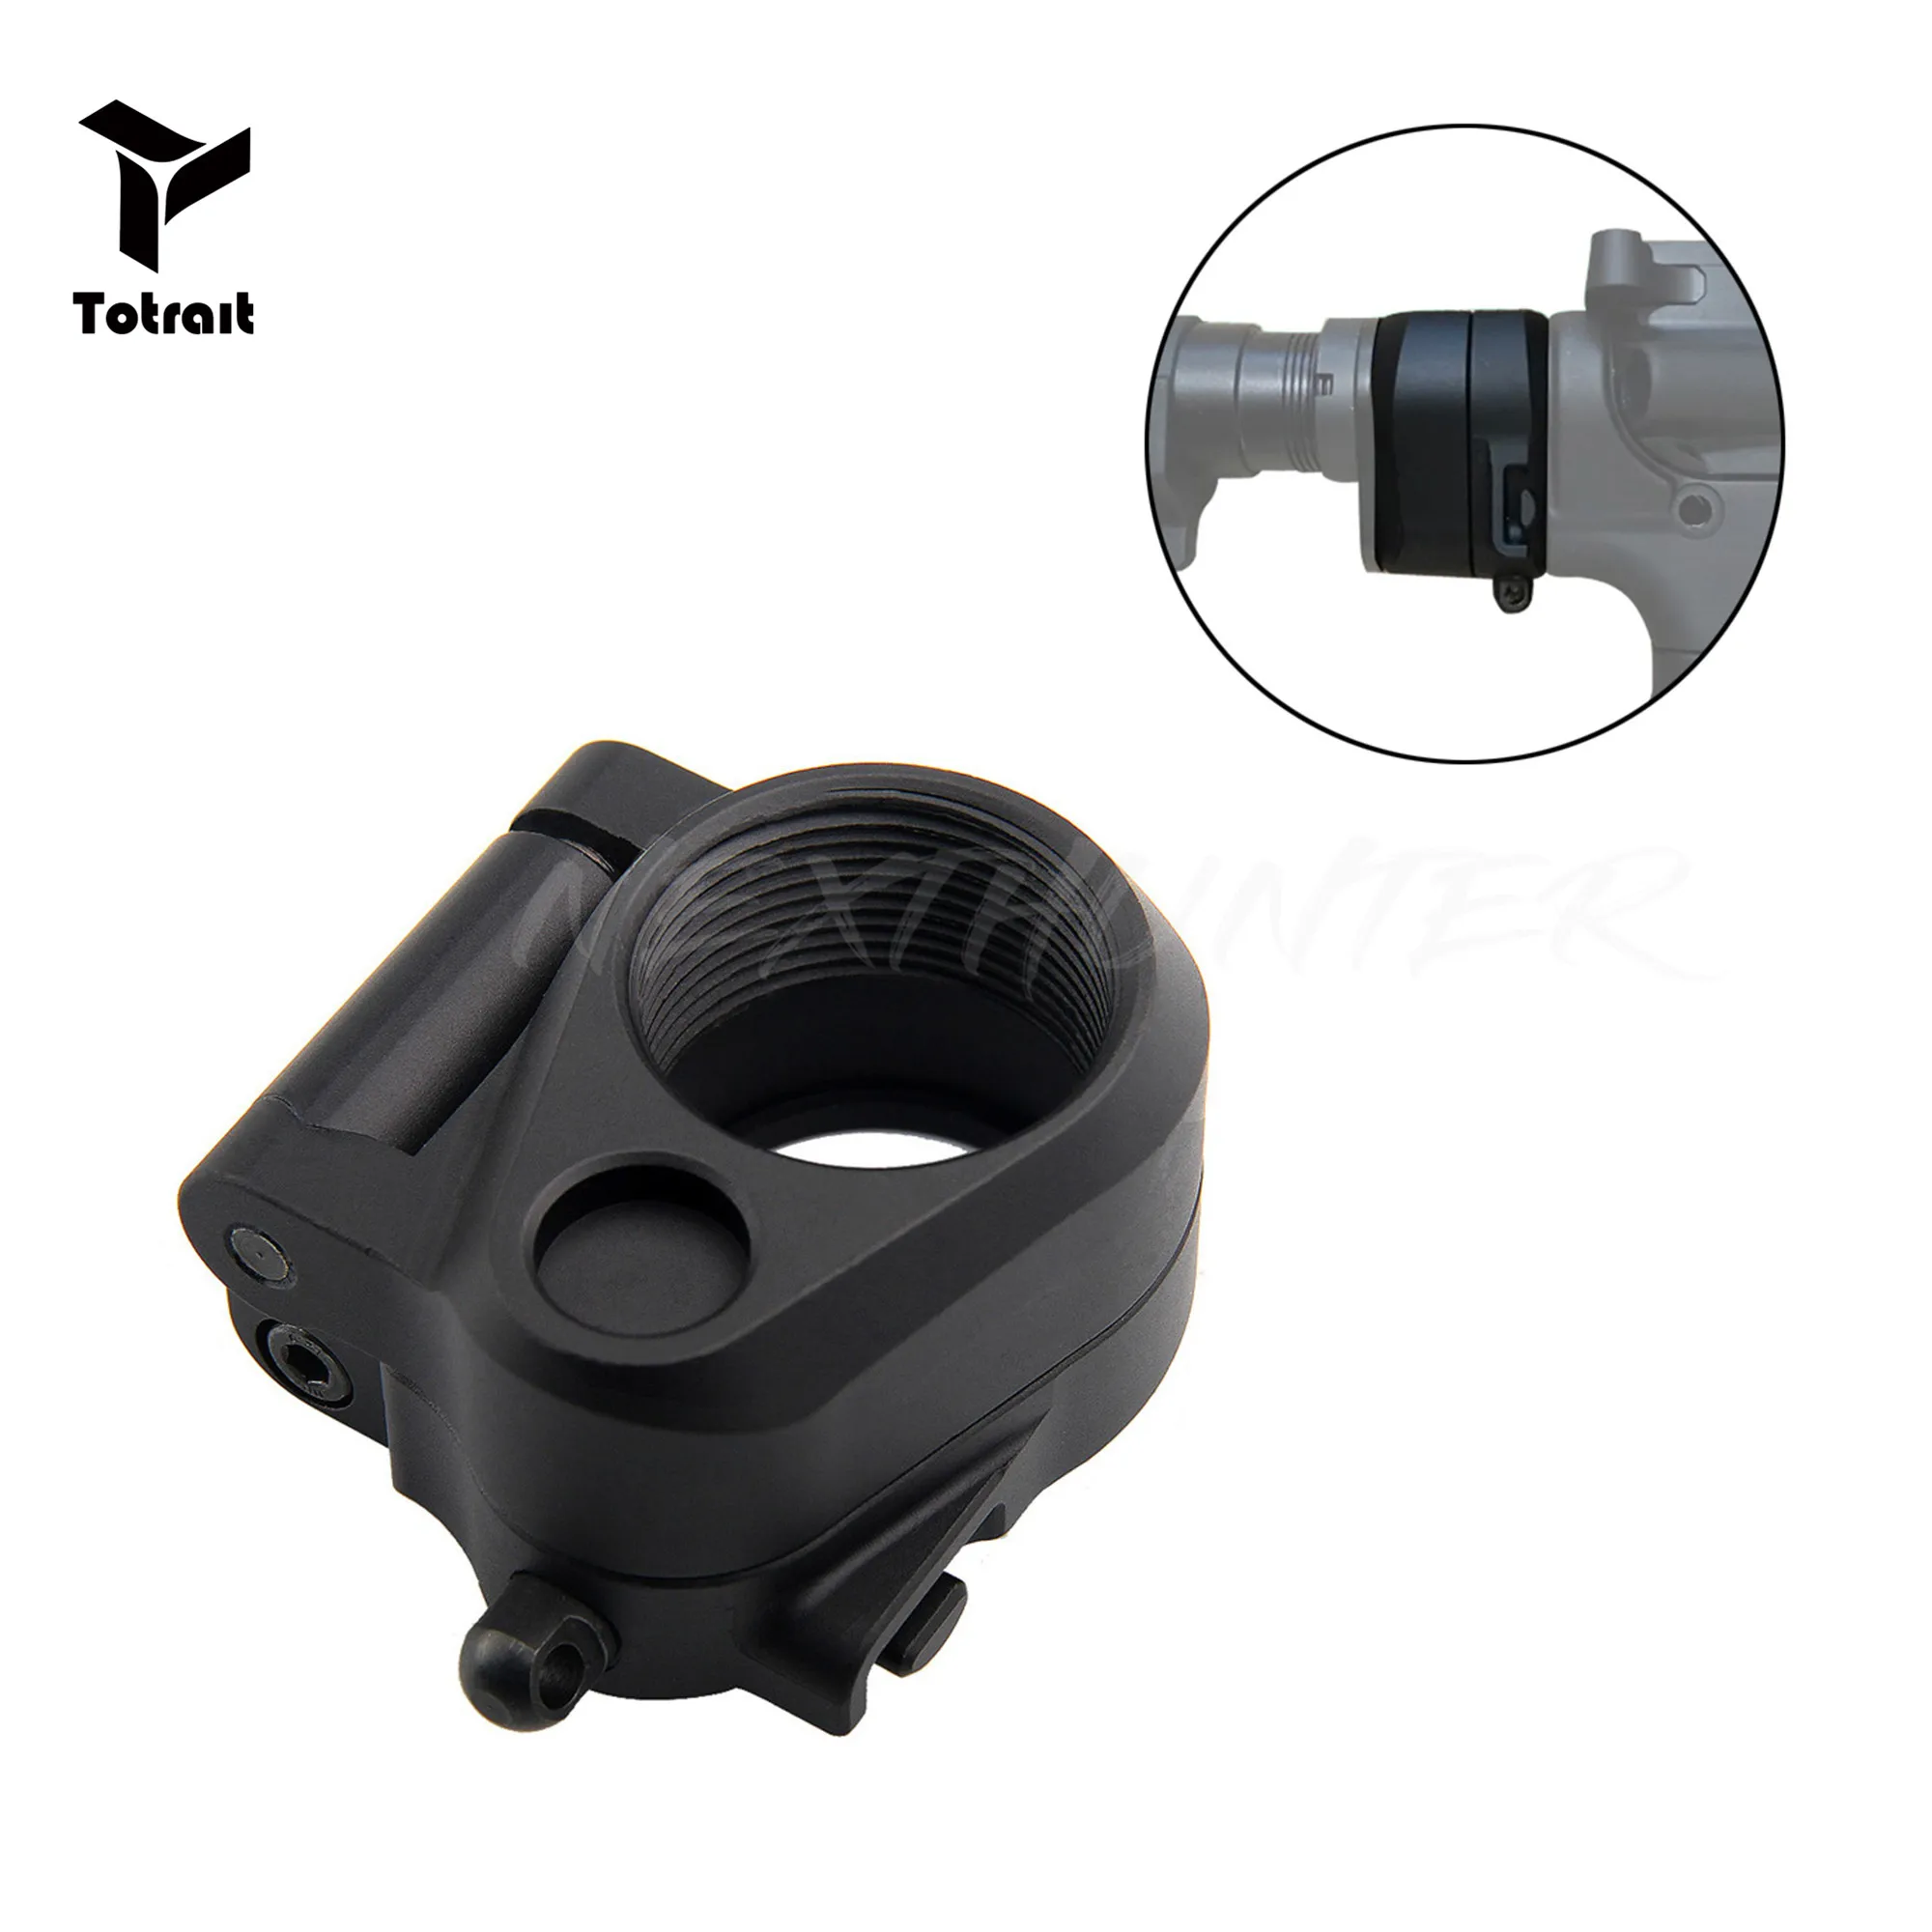 

Tactical AR Black Folding Stock Adapter Fit M16 M4 SR25 Series GBB(AEG) For Airsoft Paintball Shooting Hunting Accessories